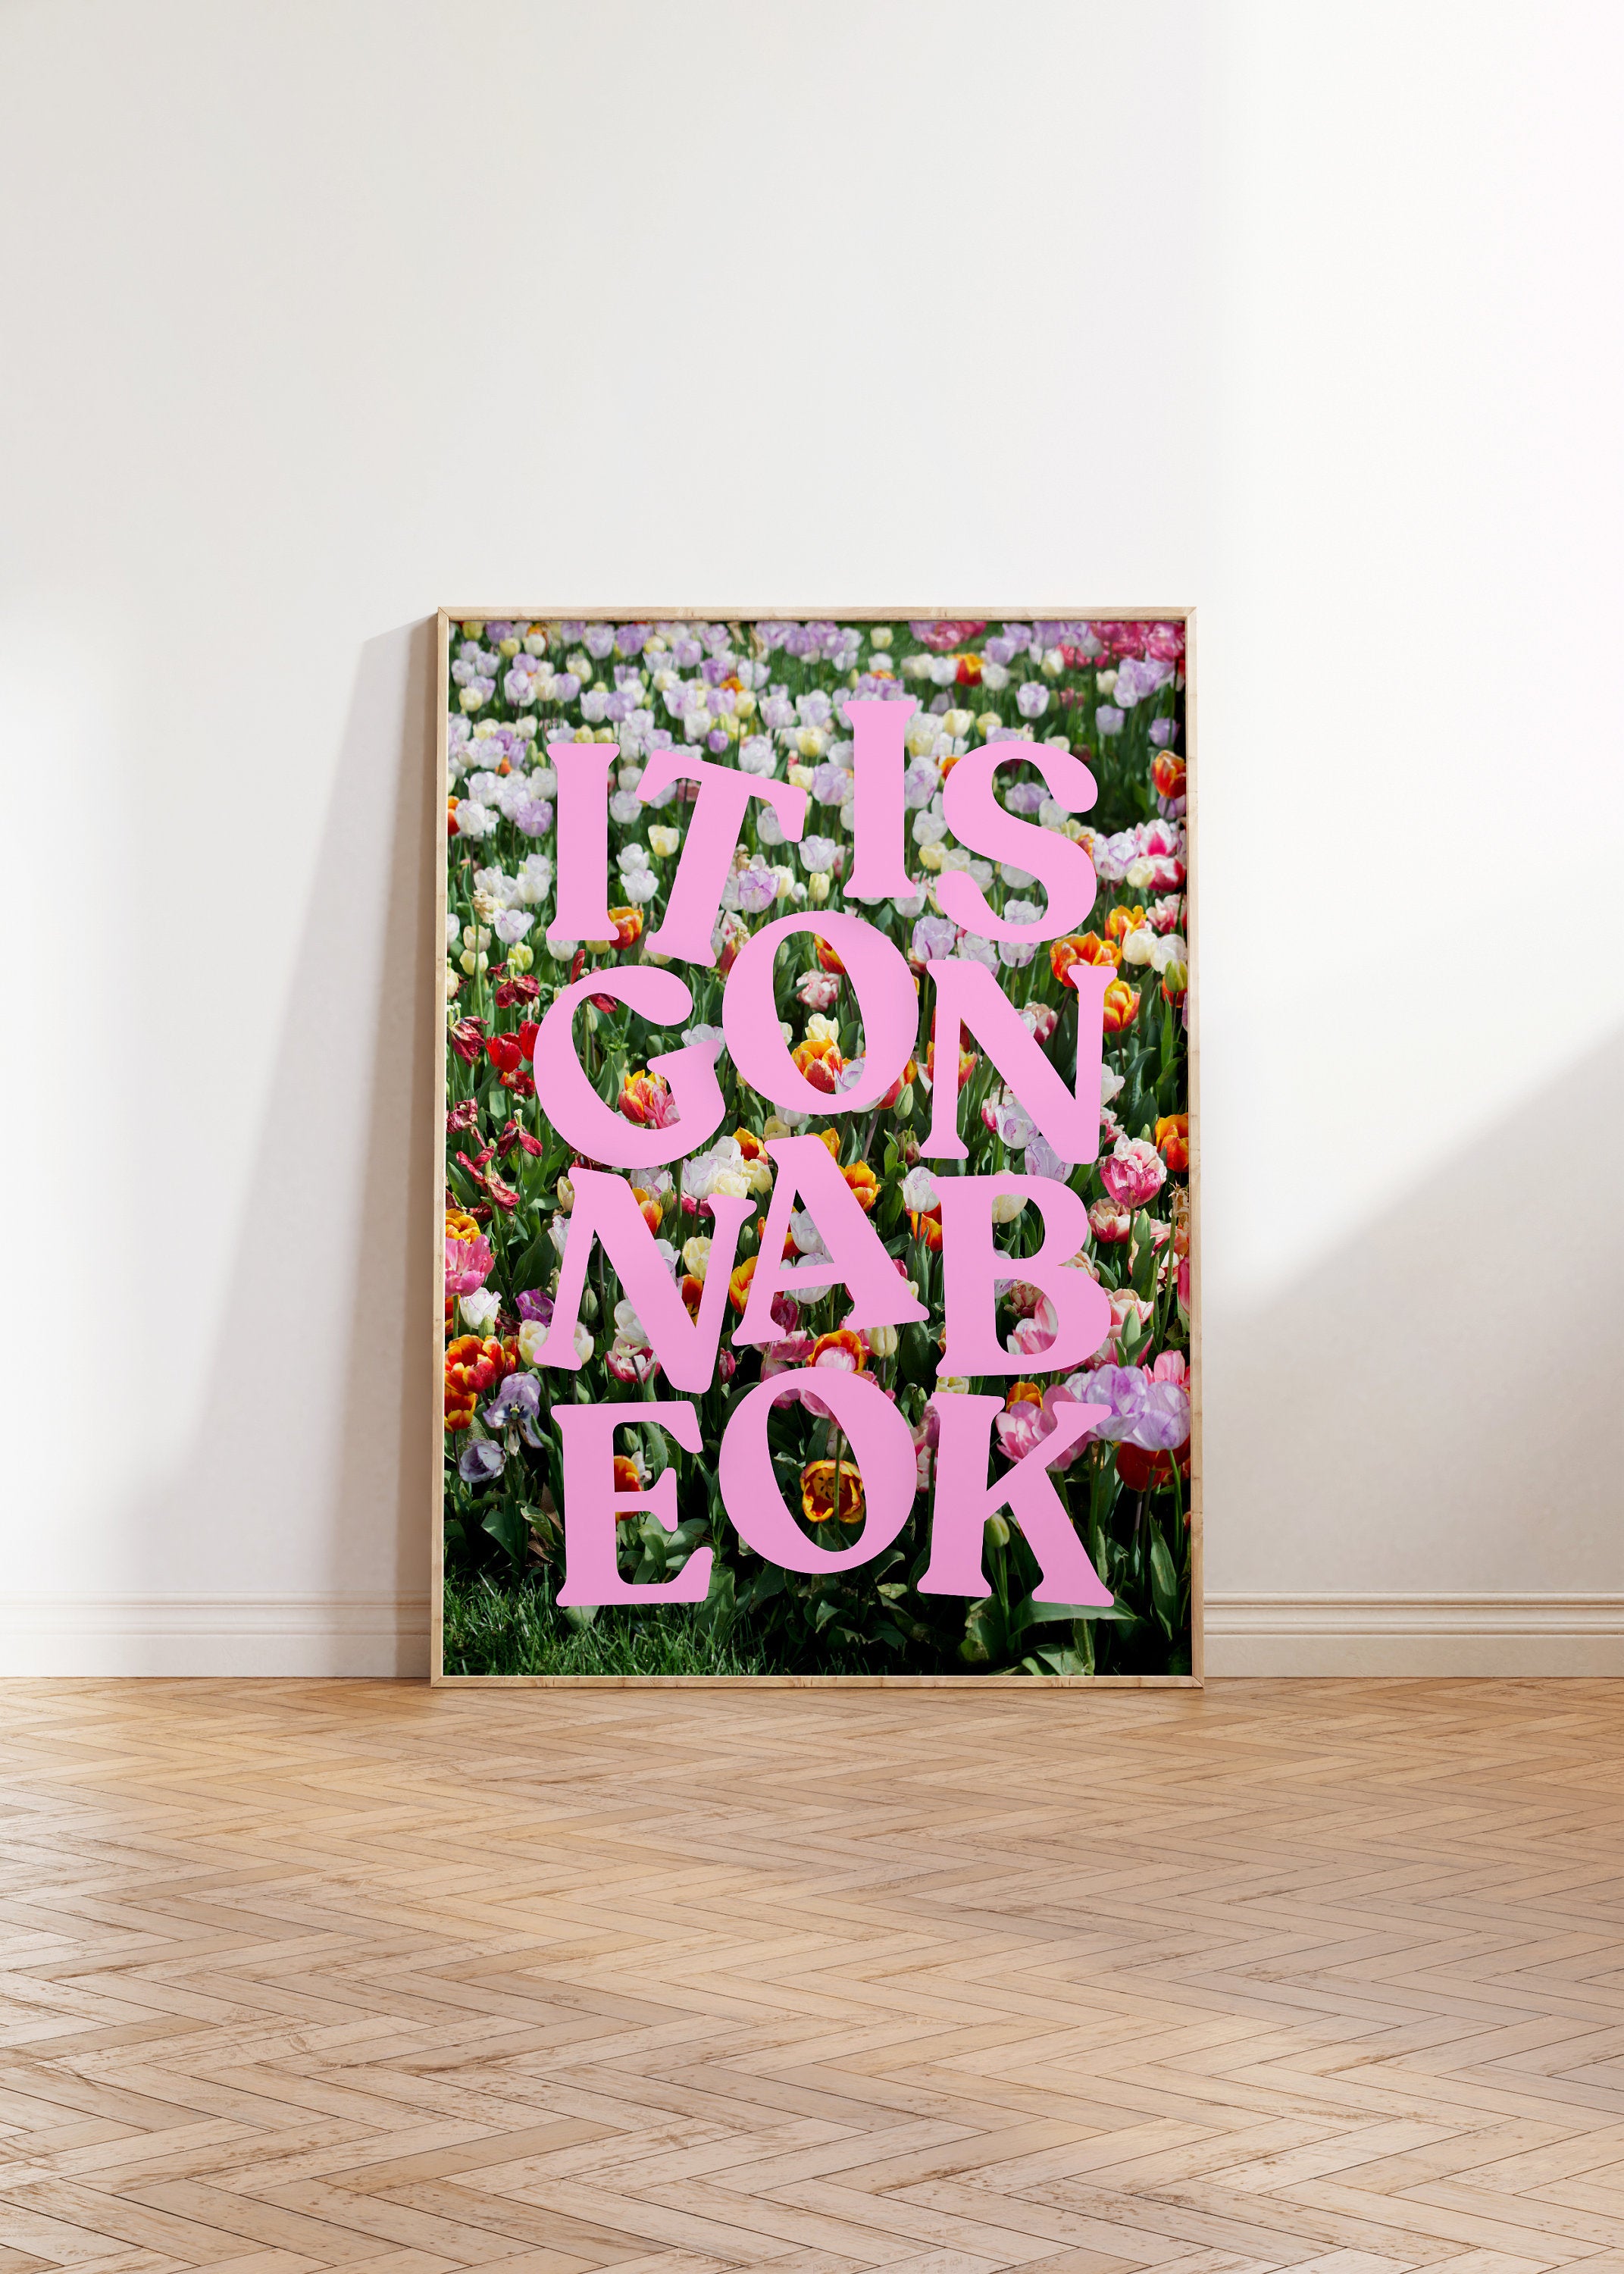 It's Gonna Be Okay, Digital Download, Trendy Wall Art, Floral Art Poster, Preppy Pink Aesthetic, Girly Wall Art, Maximalist Pink Decor